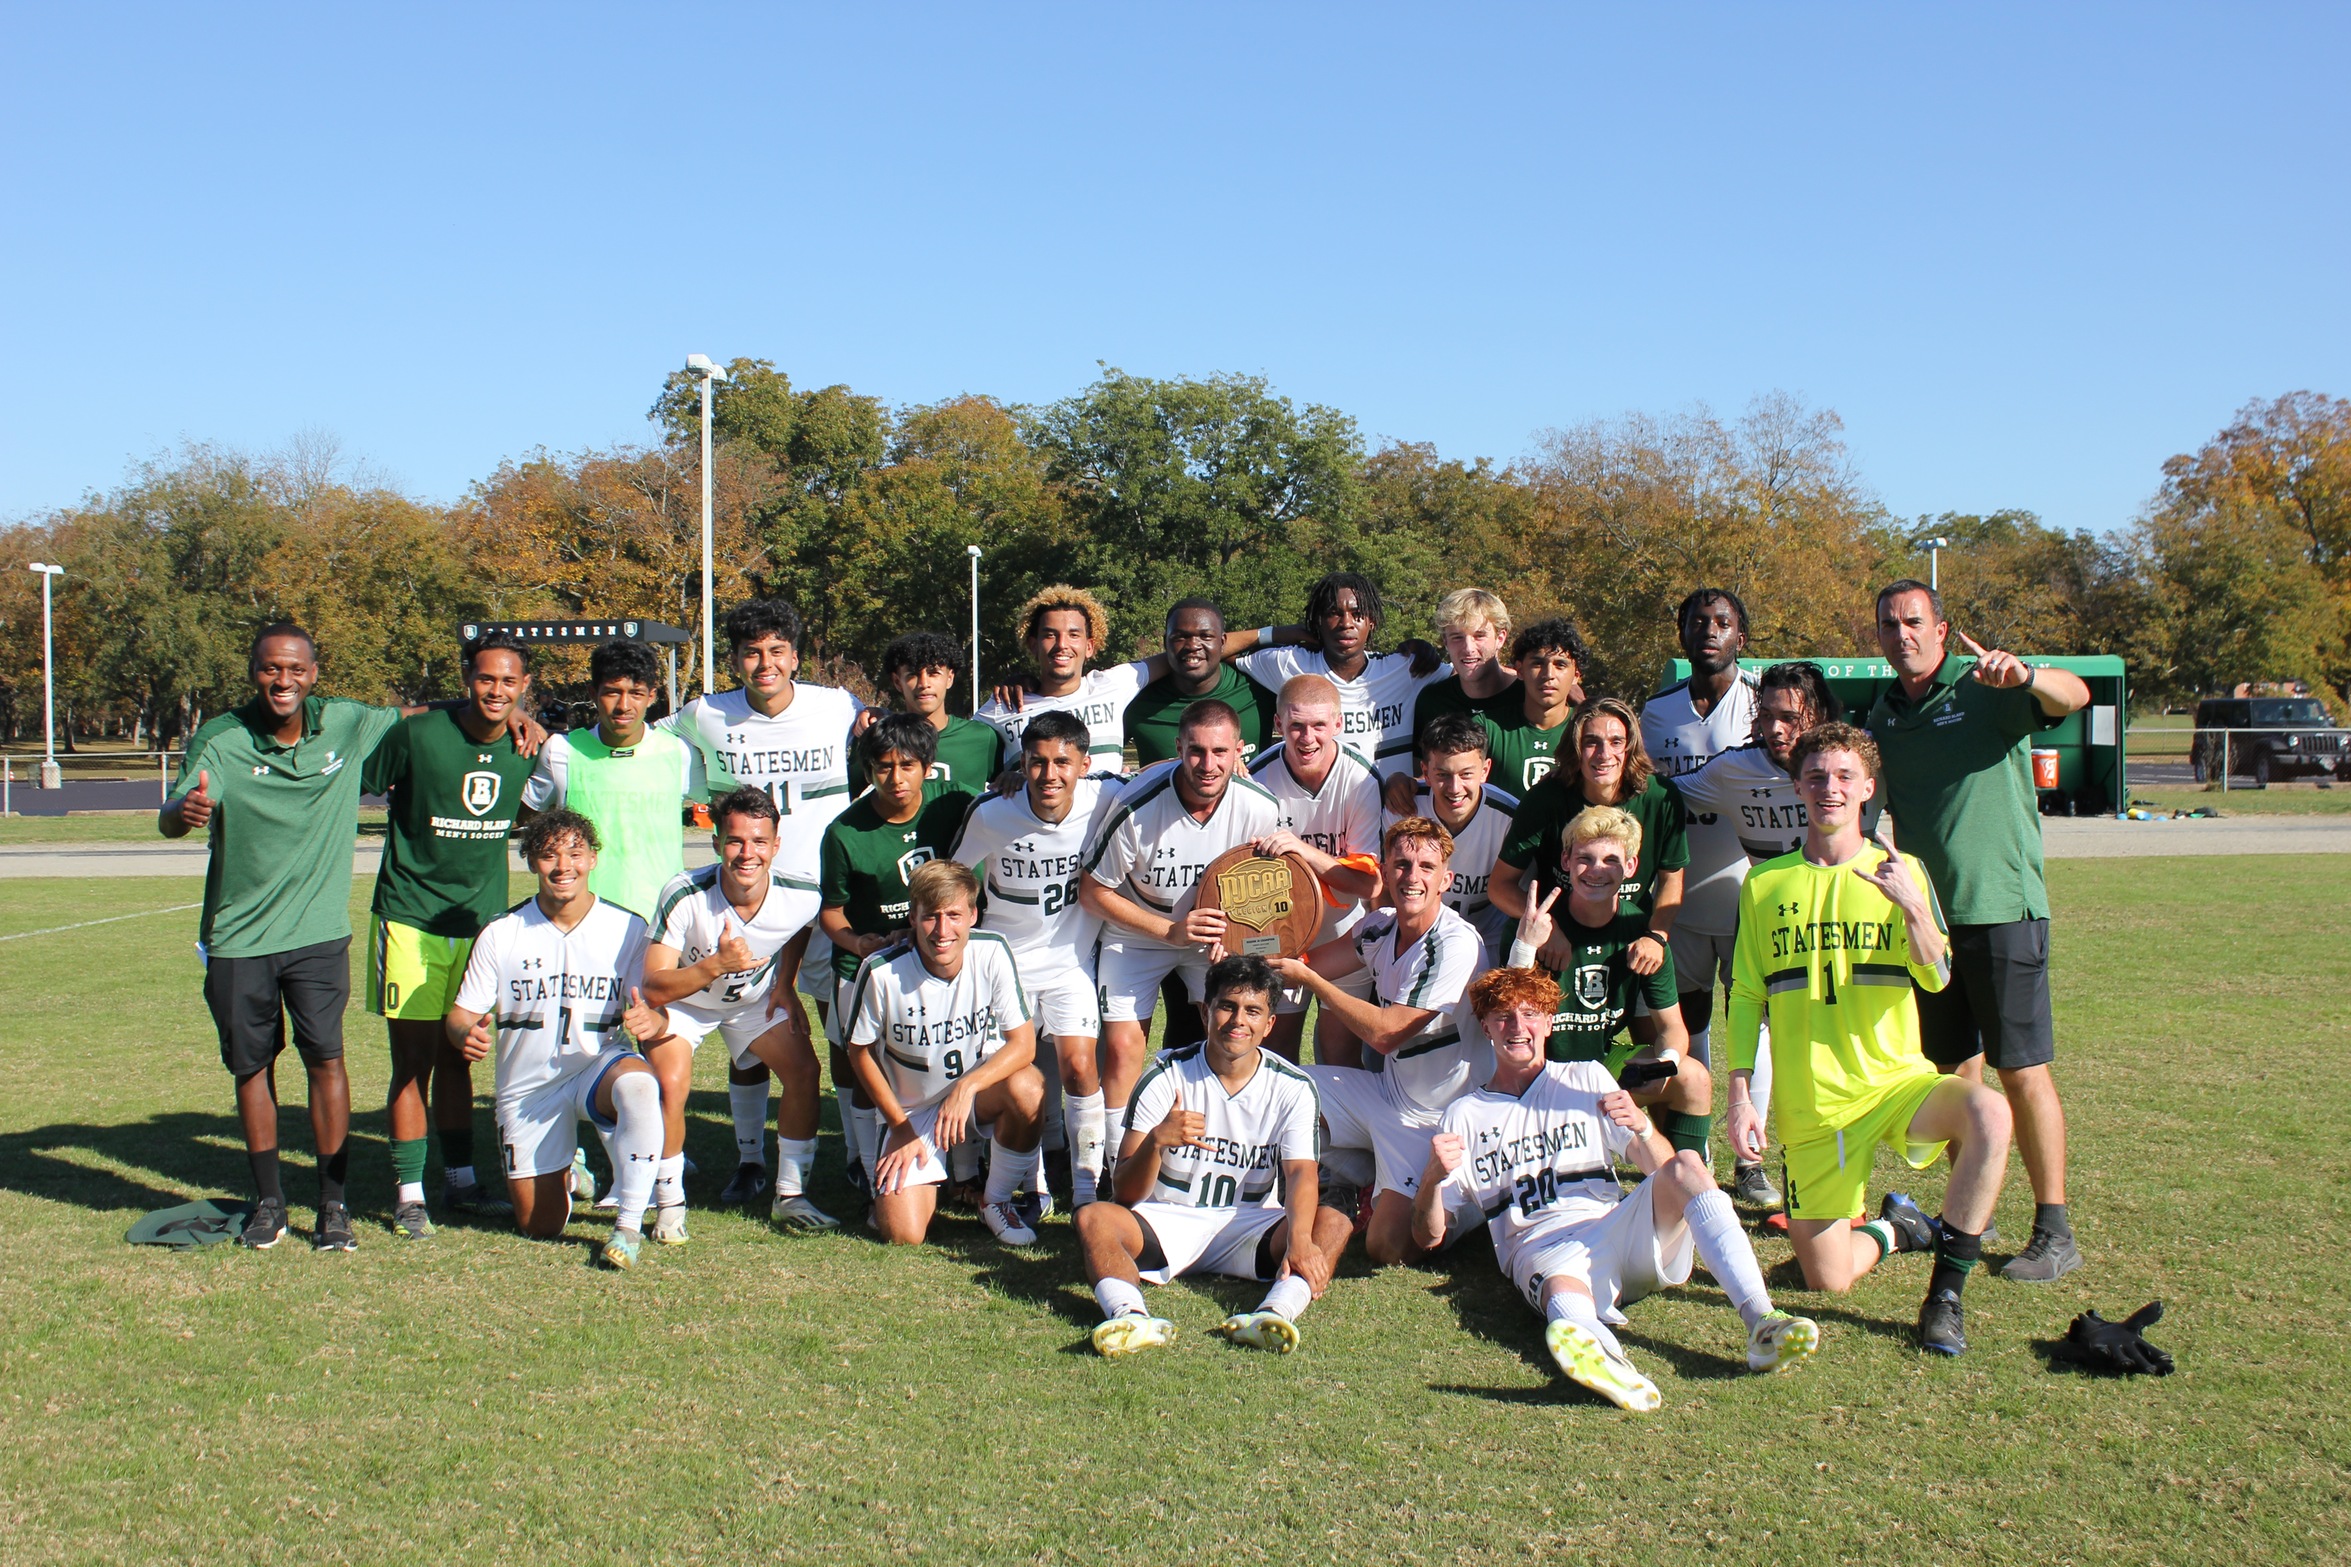 Men’s Soccer Crowned Region 10 Champions Third Year in a Row